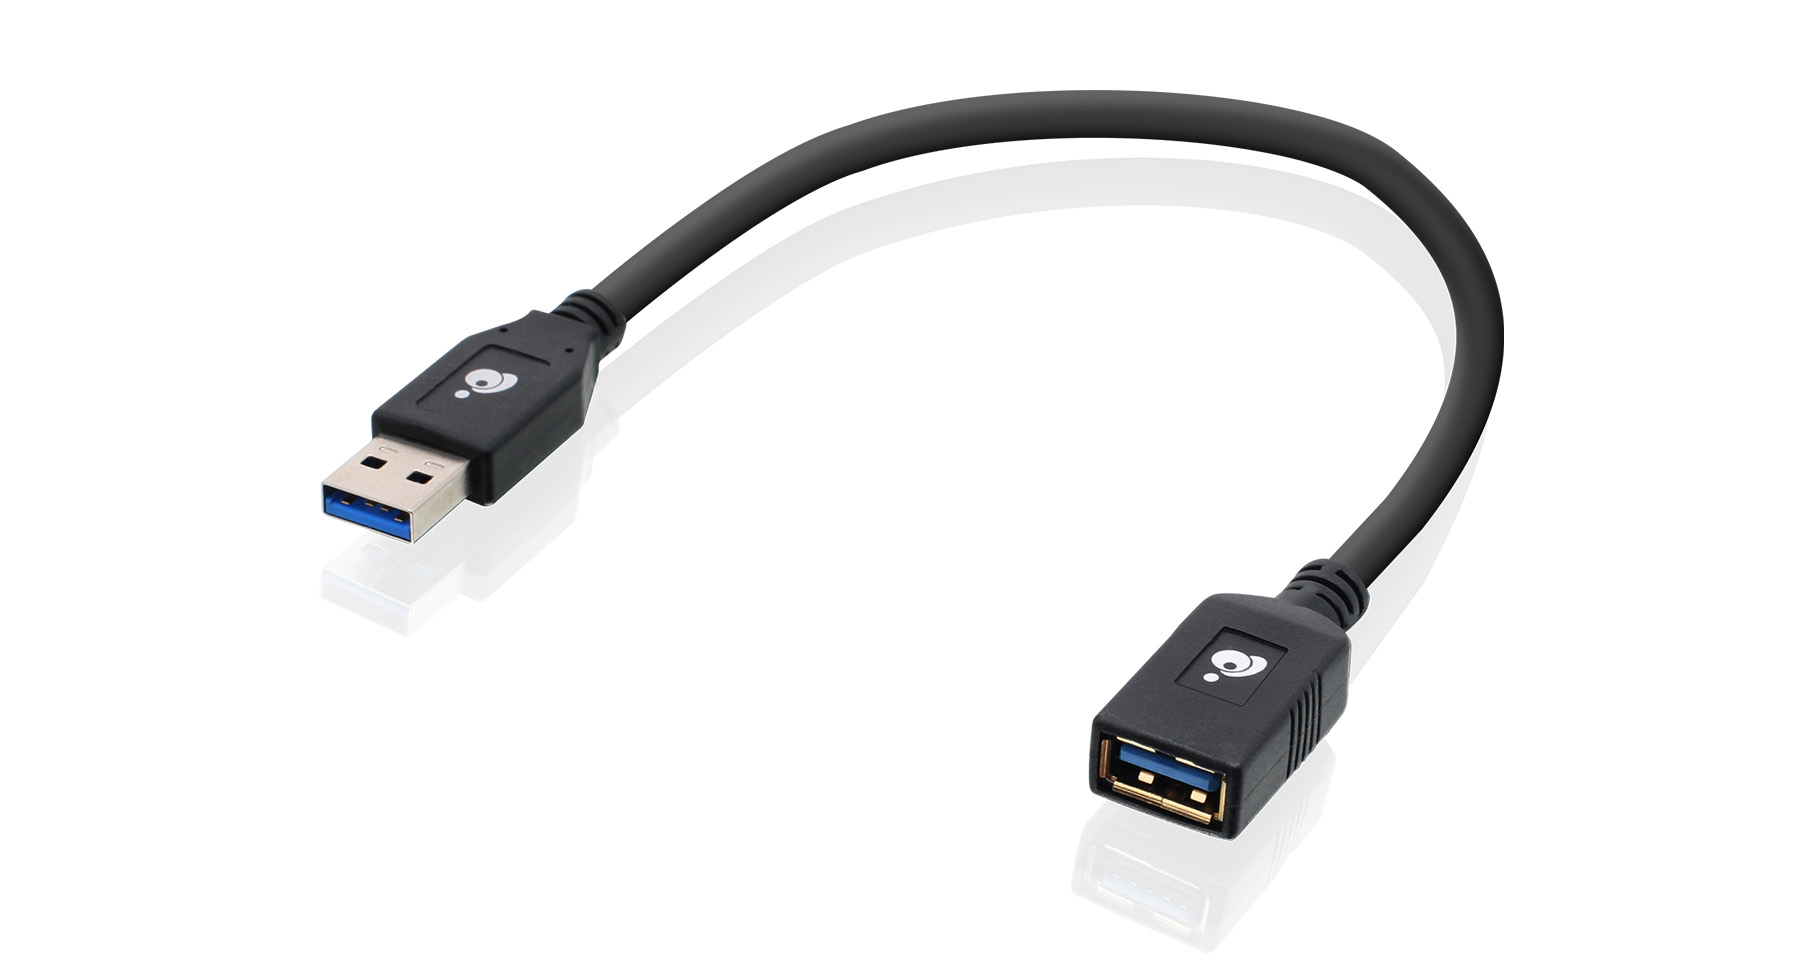 Length 29cm Computer Cable connectors USB Cables 2 in 1 USB 3.0 Female to USB 2.0 USB 3.0 Male Cable for Computer/Laptop 